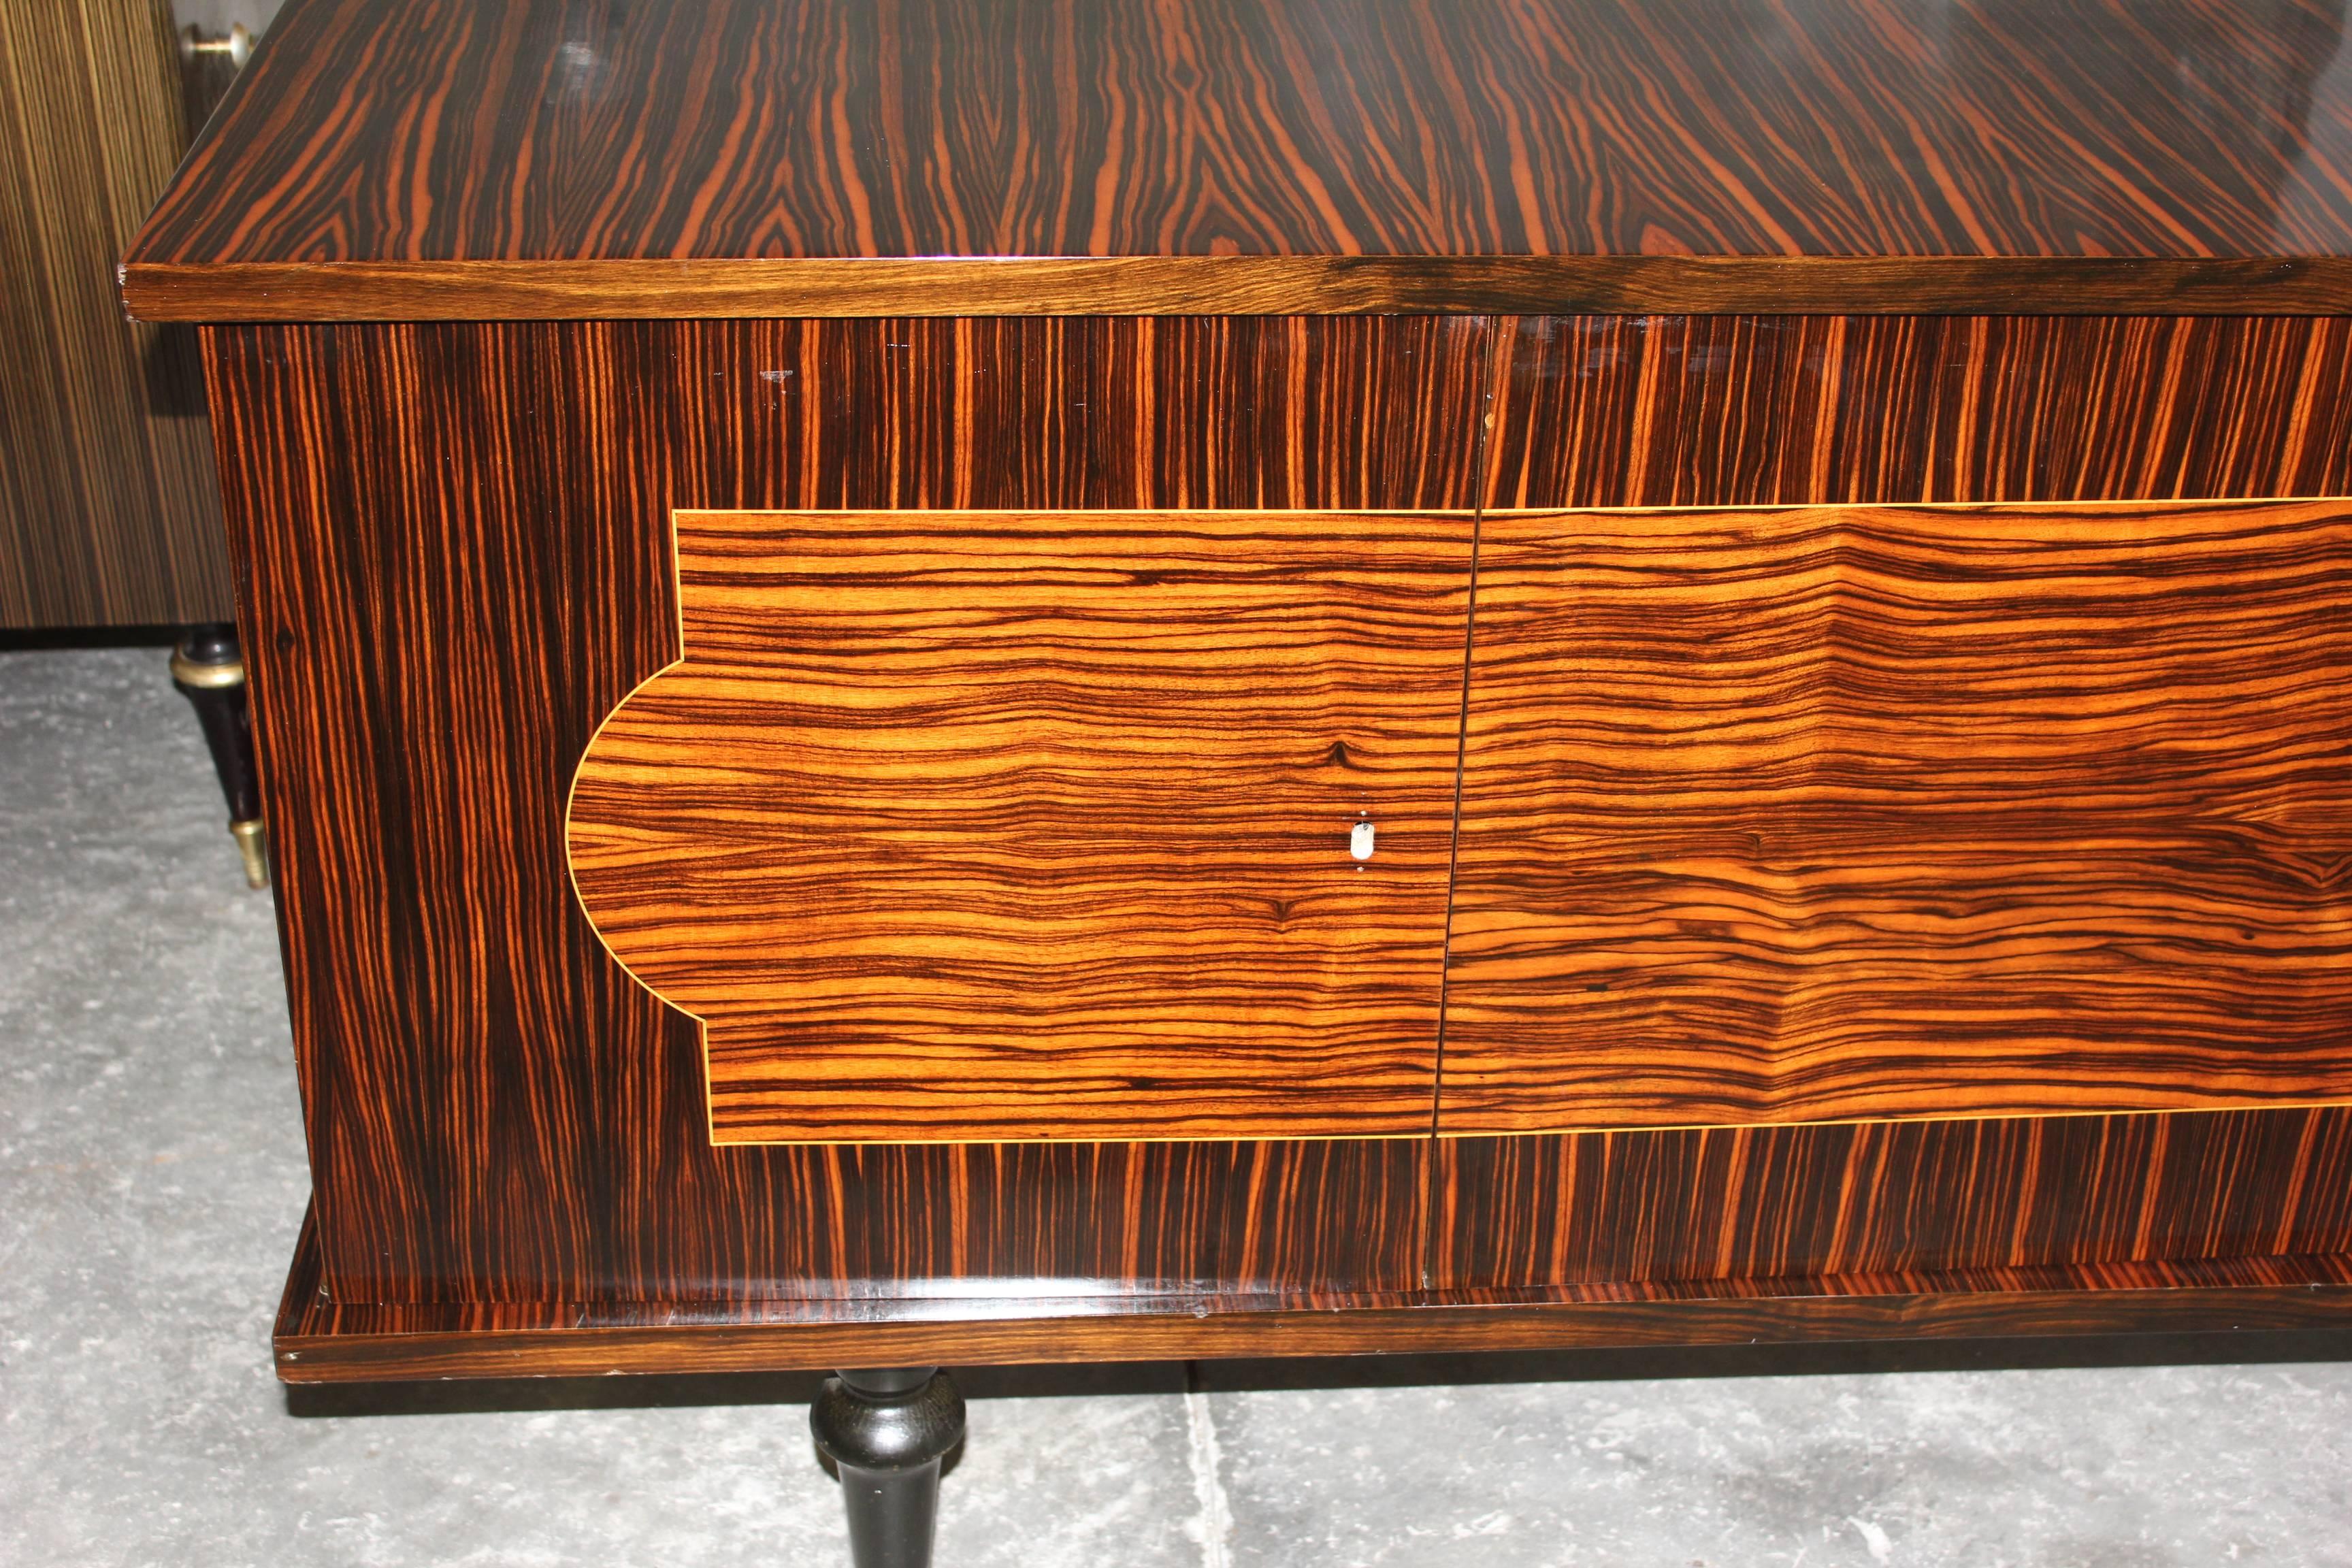 A French Art Deco sideboard /buffet  Macassar ebony, circa 1940s. High gloss finish and interior Finished ,circa 1940.